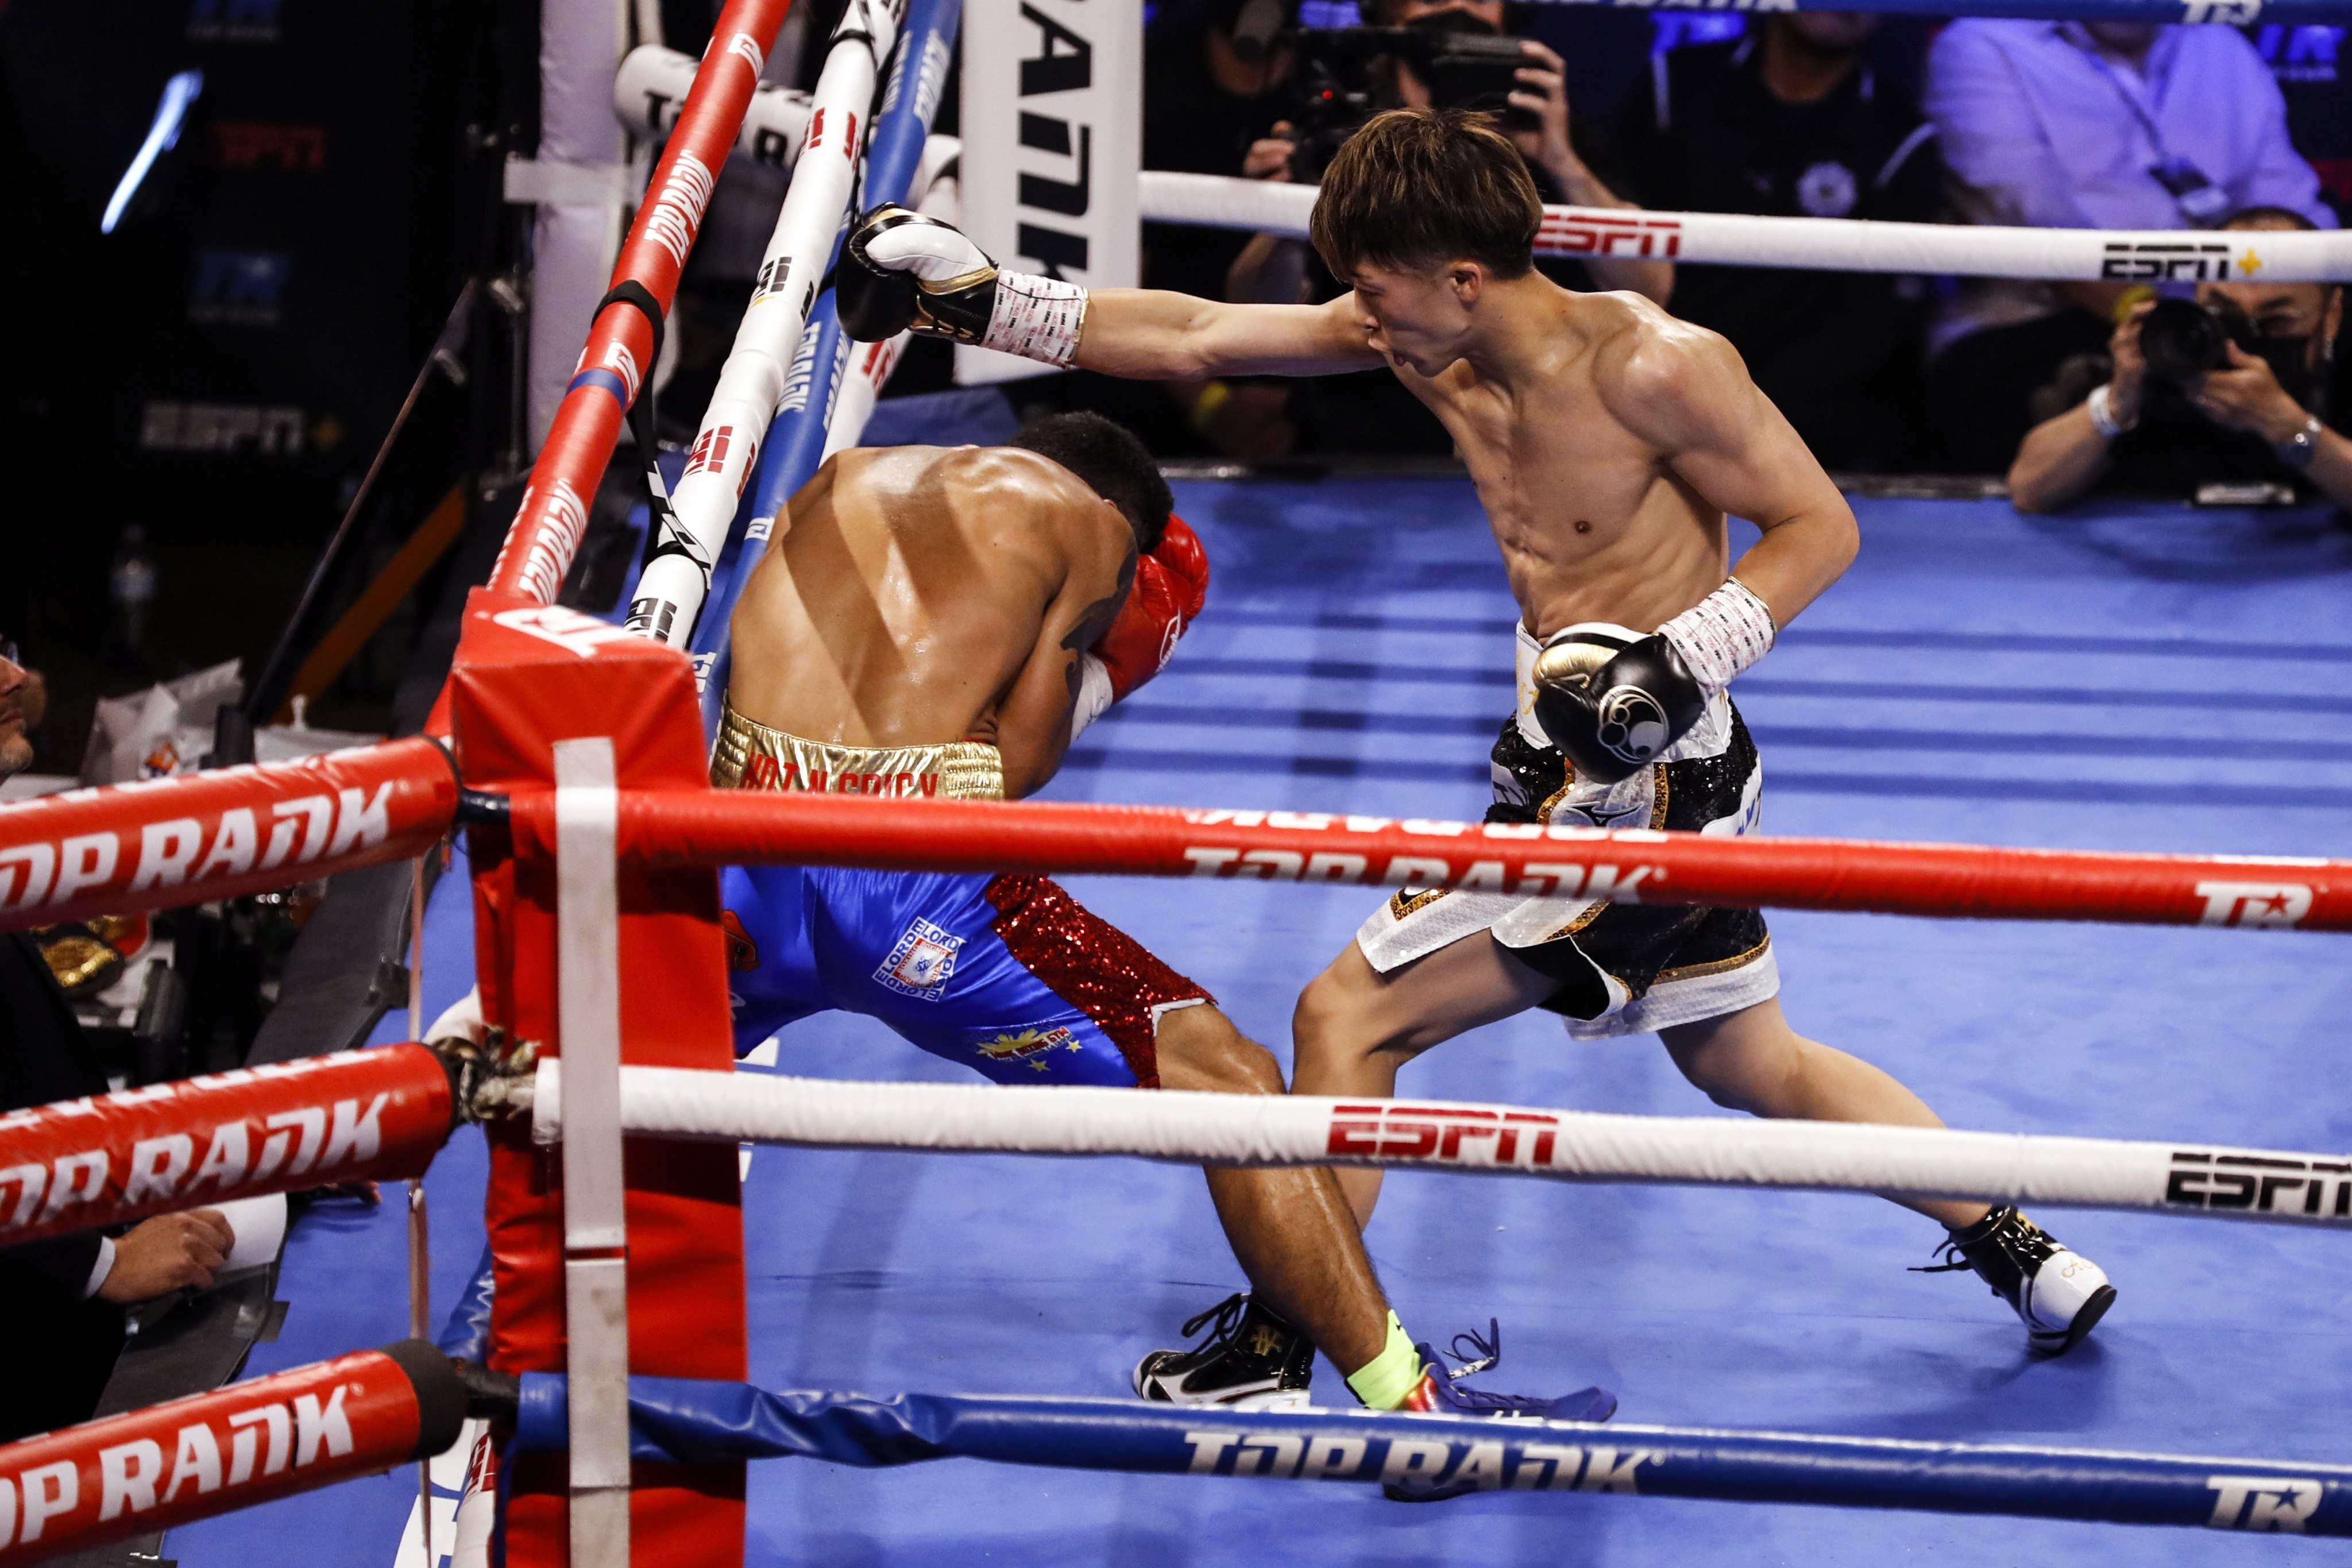 Naoya Inoue (R) of Japan in action against Michael Dasmarinas (L) of the Philippines during their 12 rounds WBA/IBF Bantamweight Title fight at The Theater at Virgin Hotels in Las Vegas on 19 June 2021. Photo: EPA-EFE